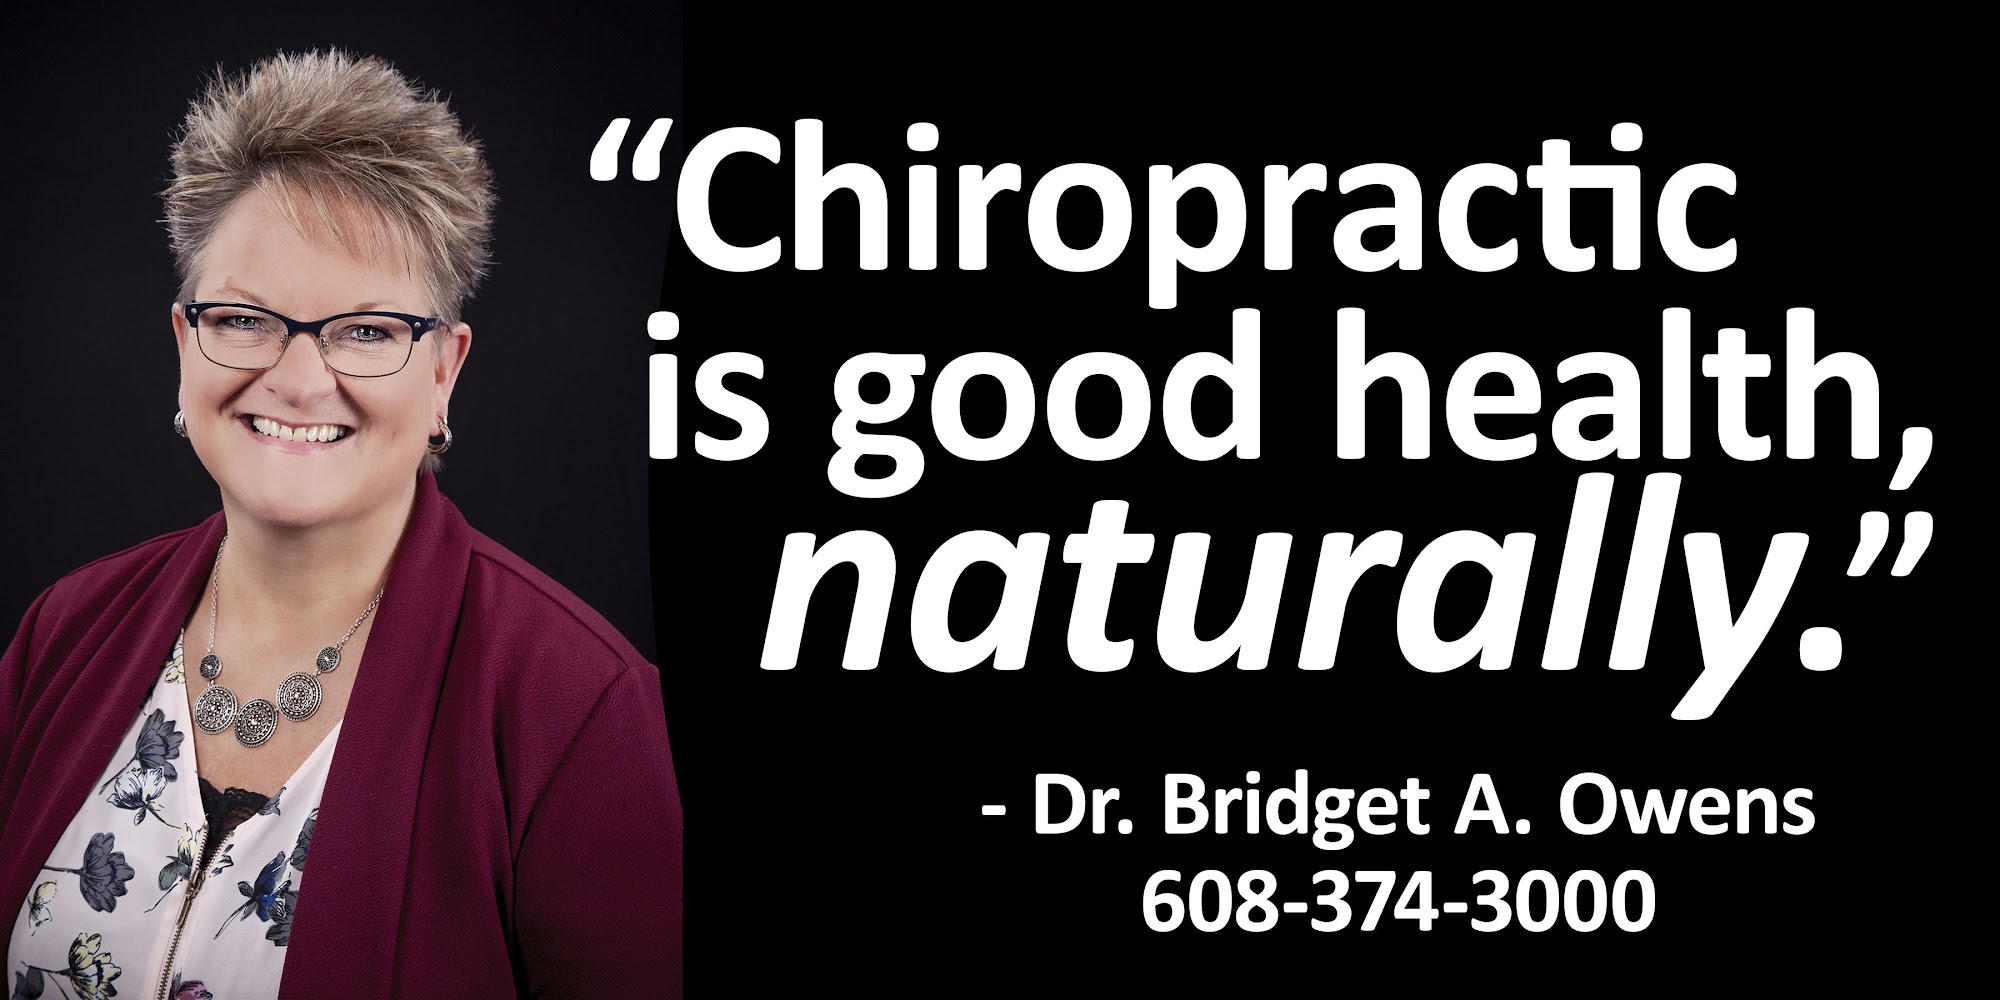 Active Health Chiropractic Center 402 Superior Ave, Tomah Wisconsin 54660